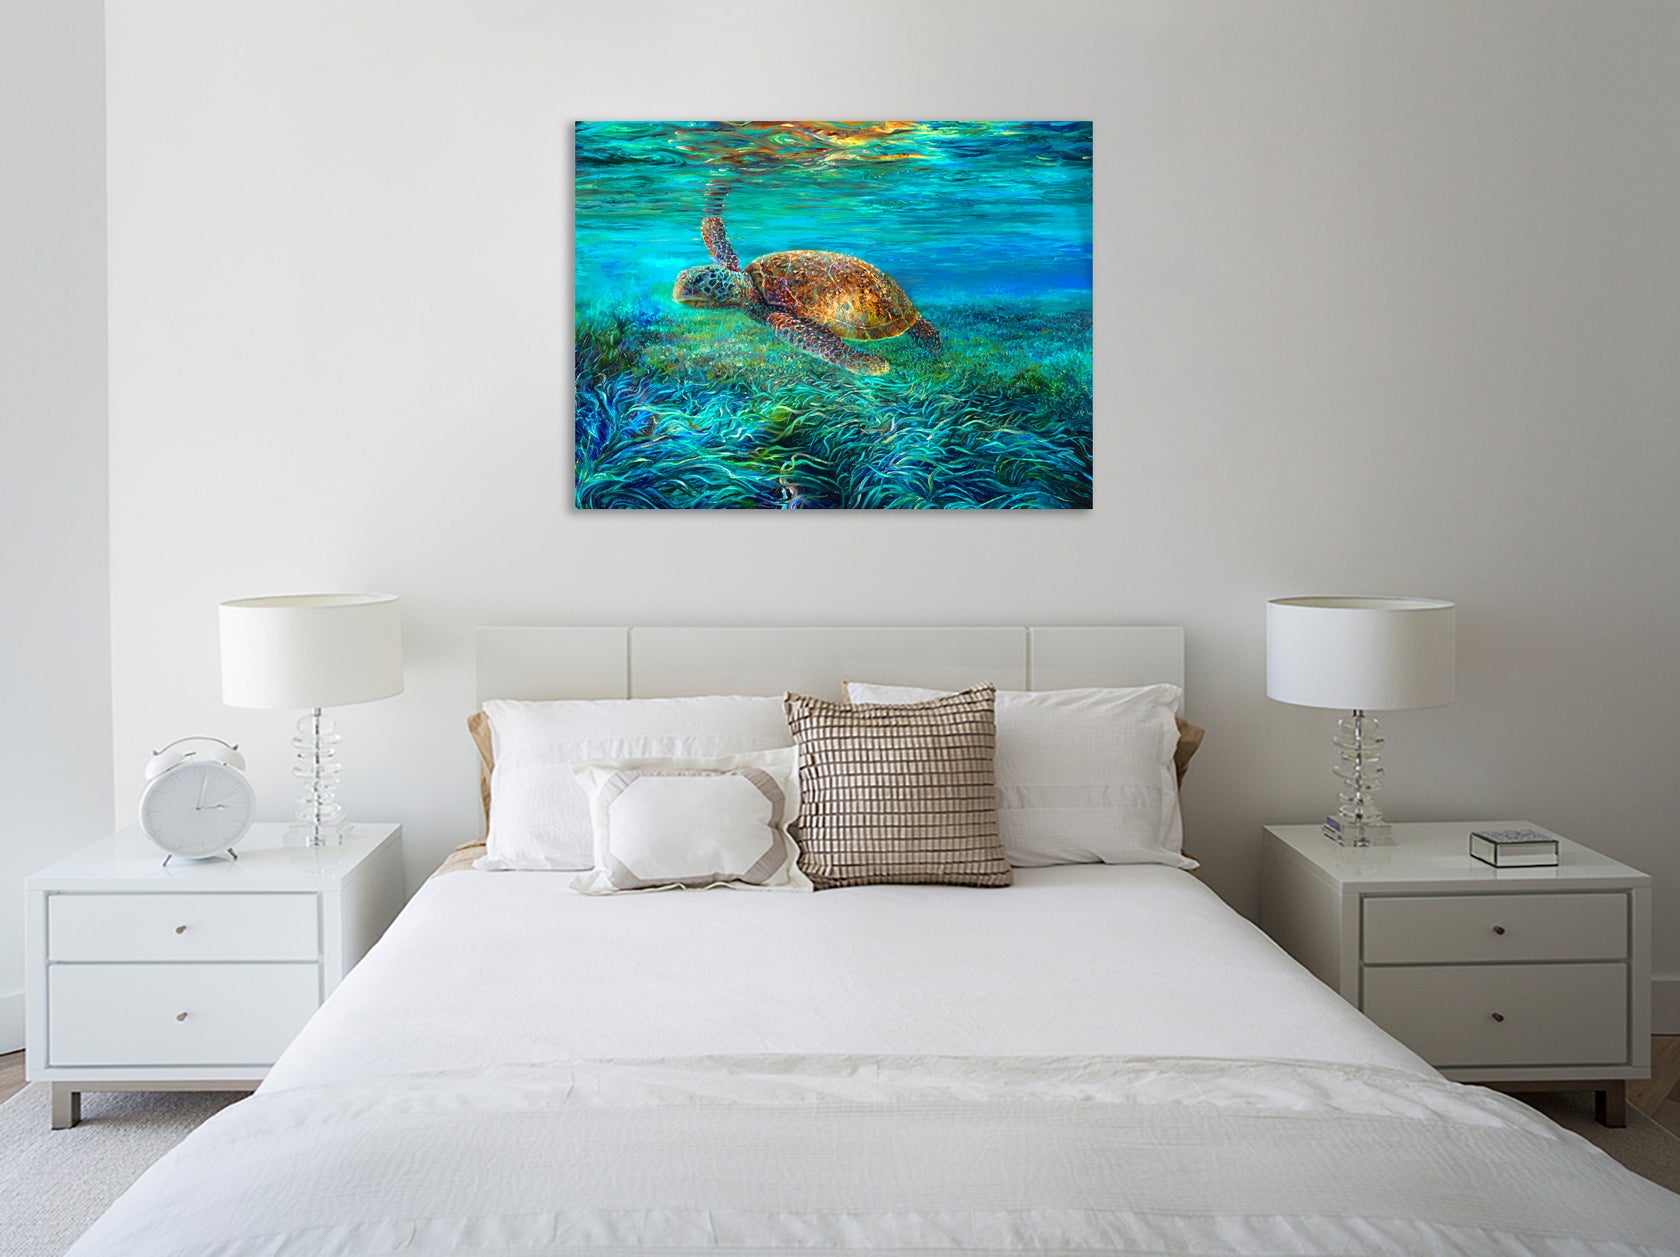 Blades Turtle by Iris Scott - Gallery Wrapped Canvas Print